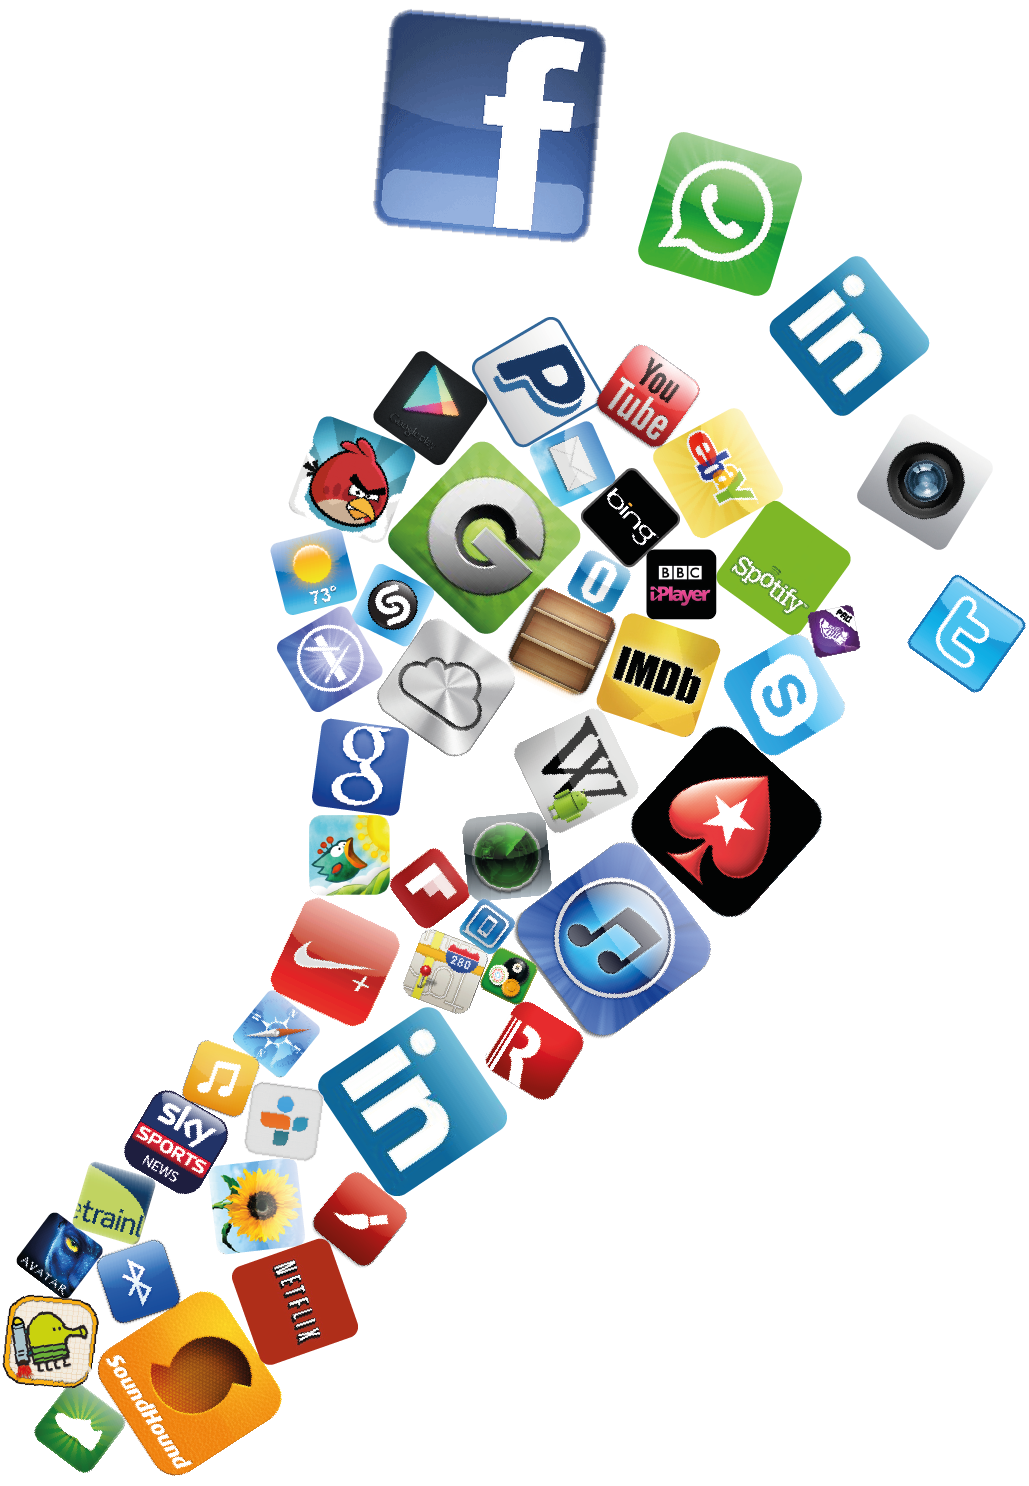 A foot made of apps including facebook and linkedin